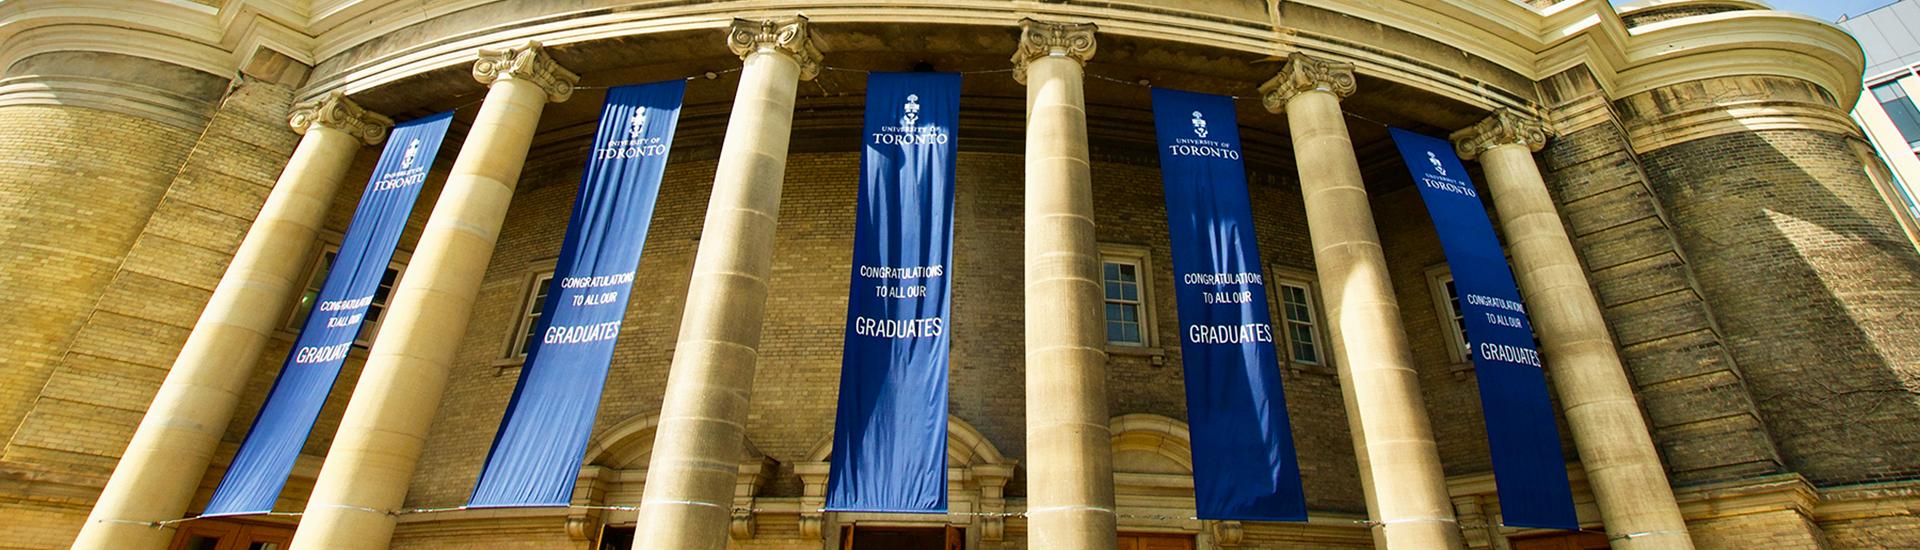 Convocation Hall on U of T Campus